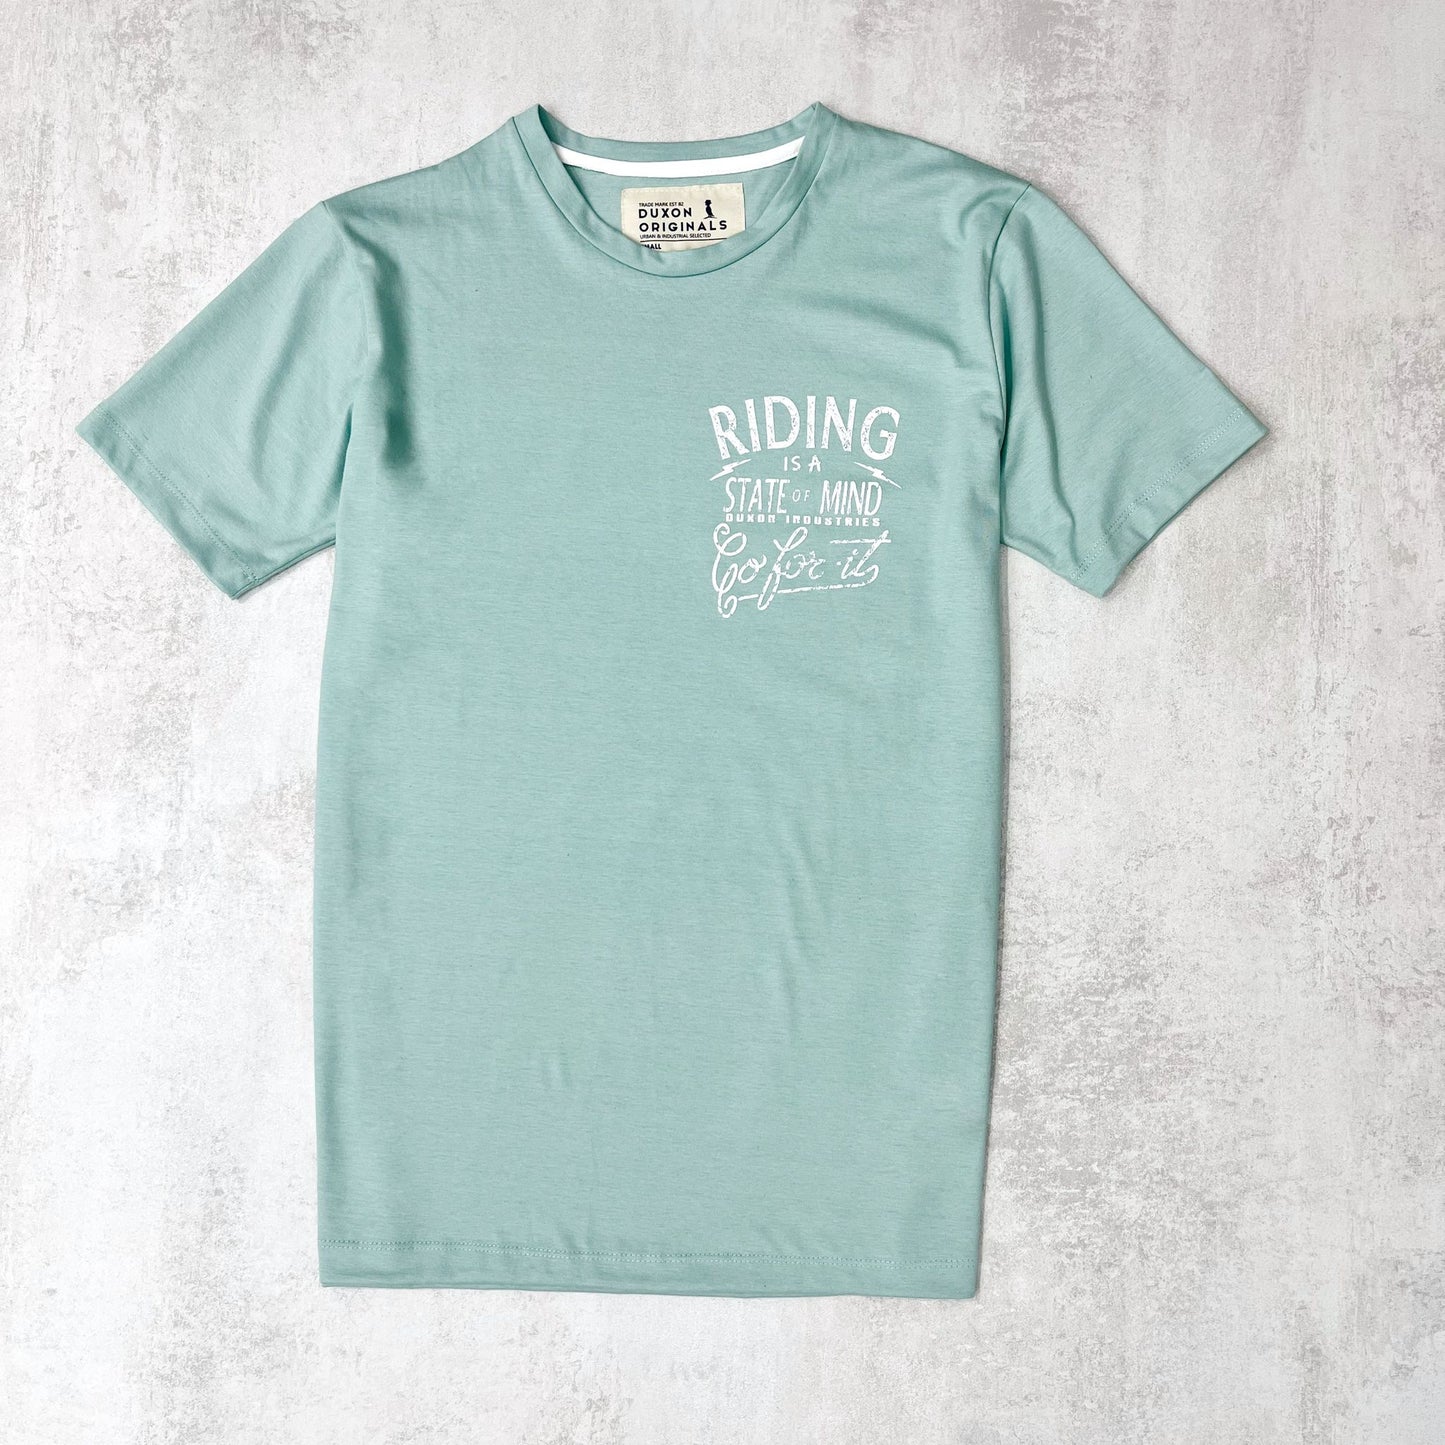 REMERA DOBLE ESTAMPA "RIDING IS A STATE OF MIND" COLOR VERDE AGUA.